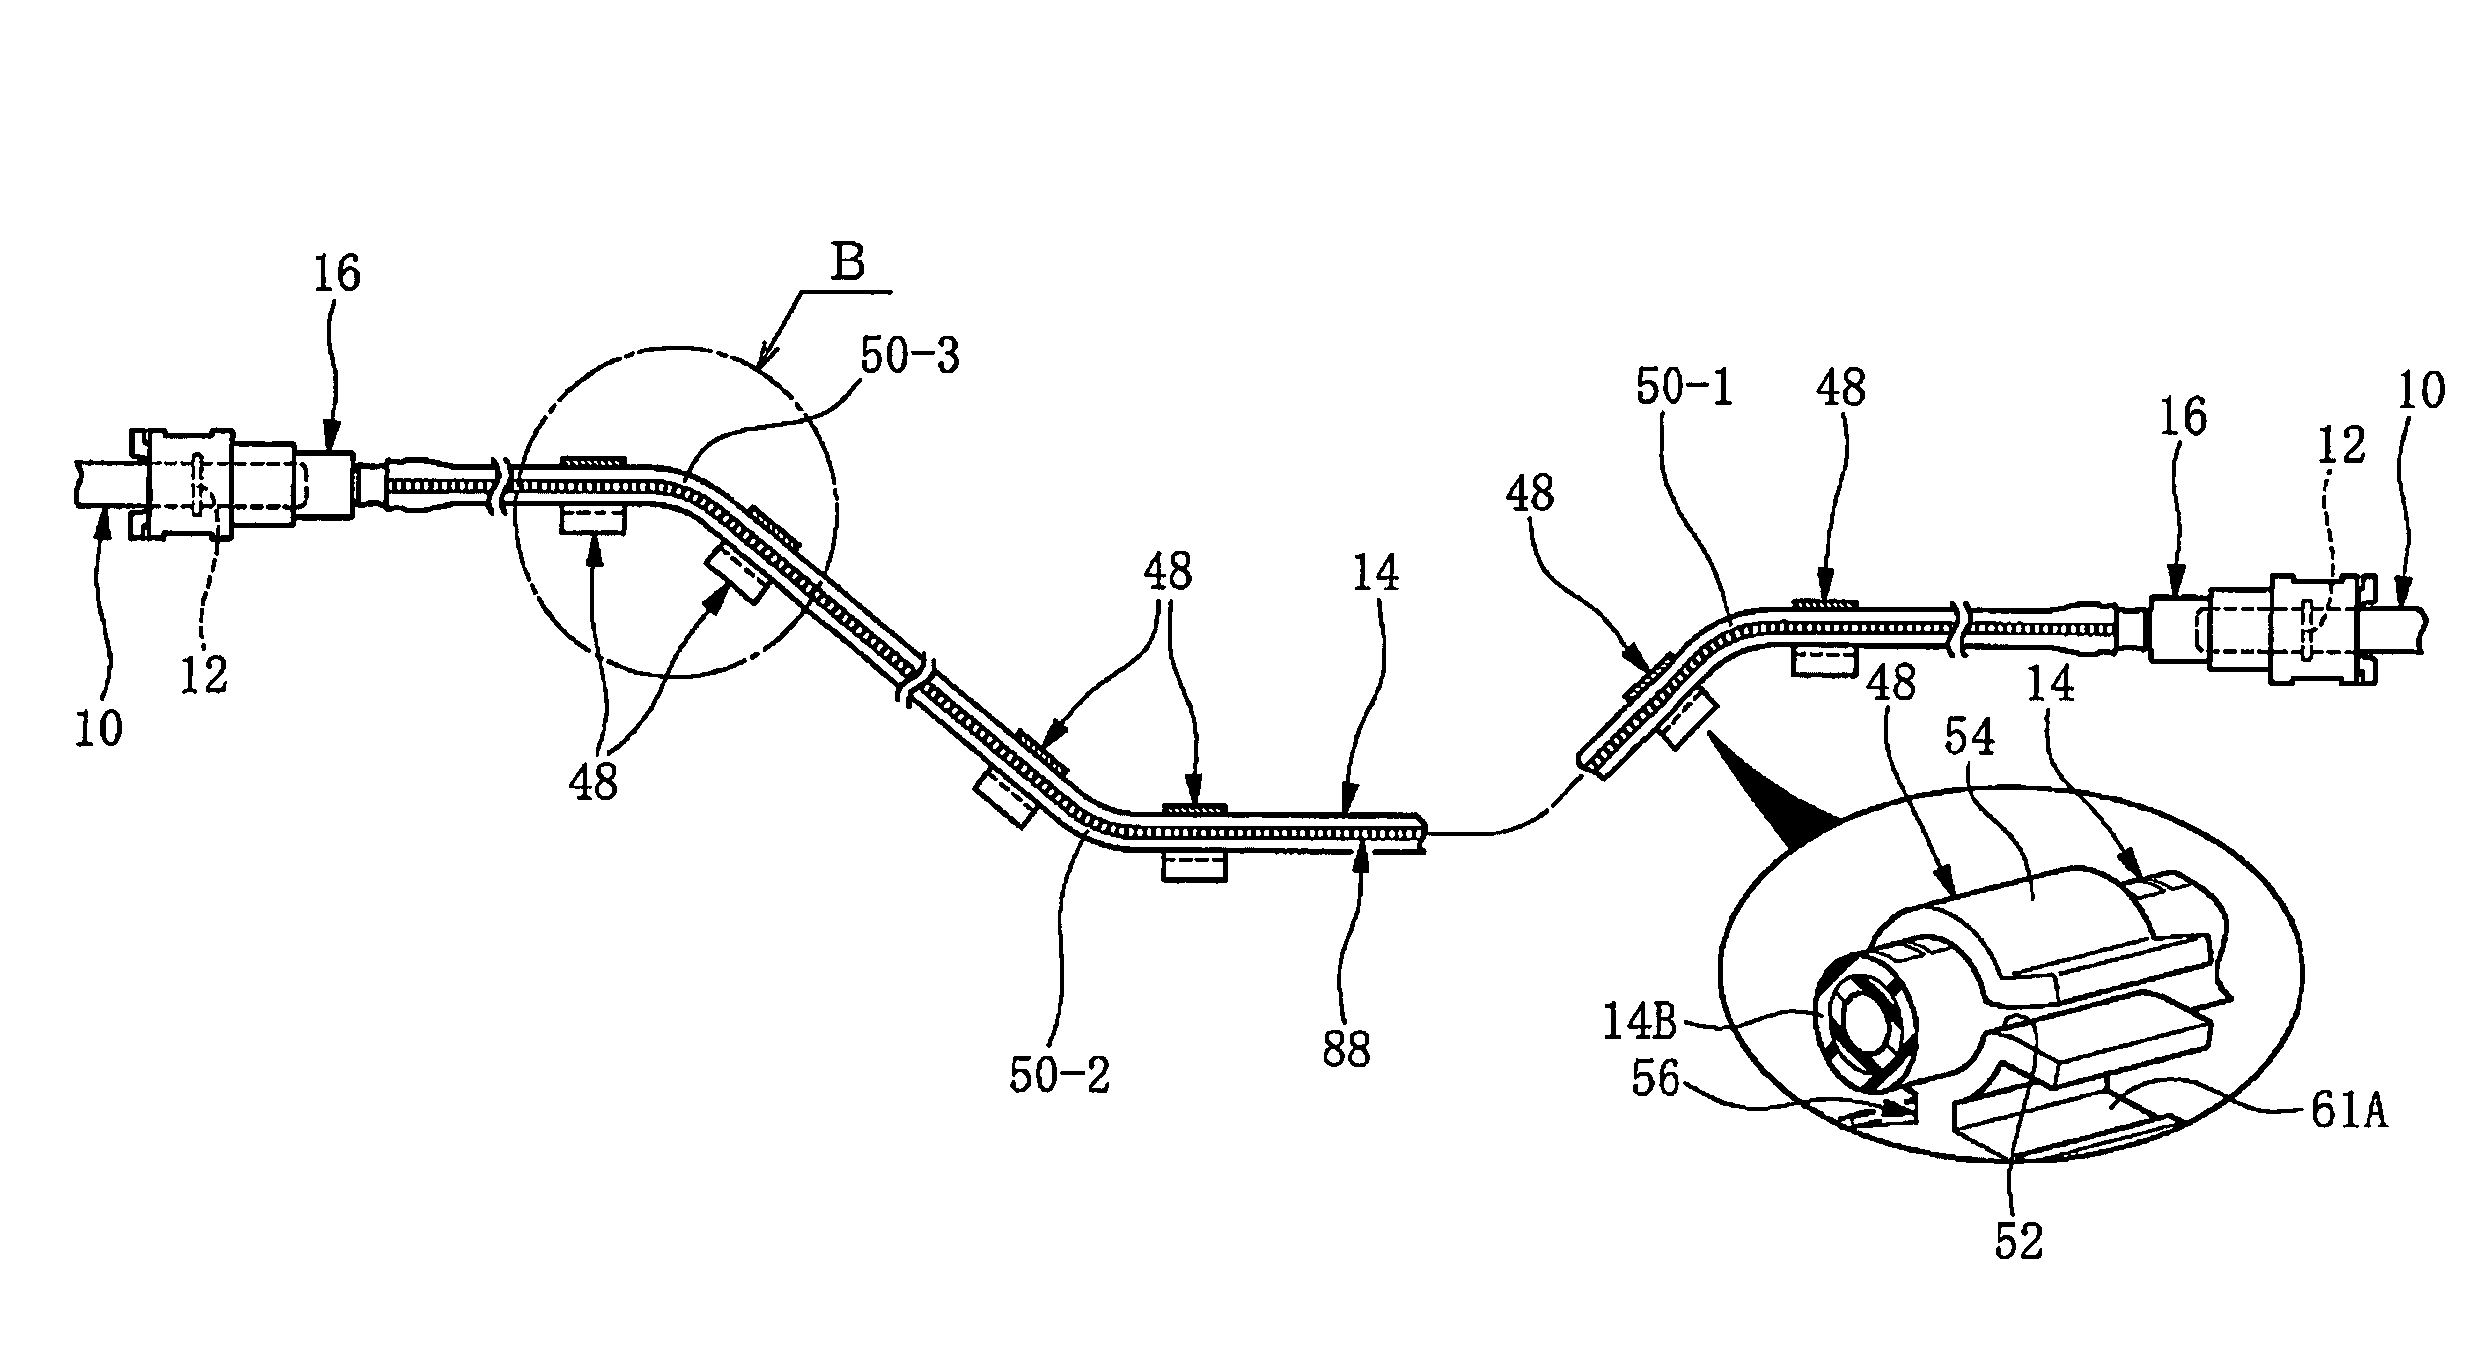 Piping structure for transporting a fuel